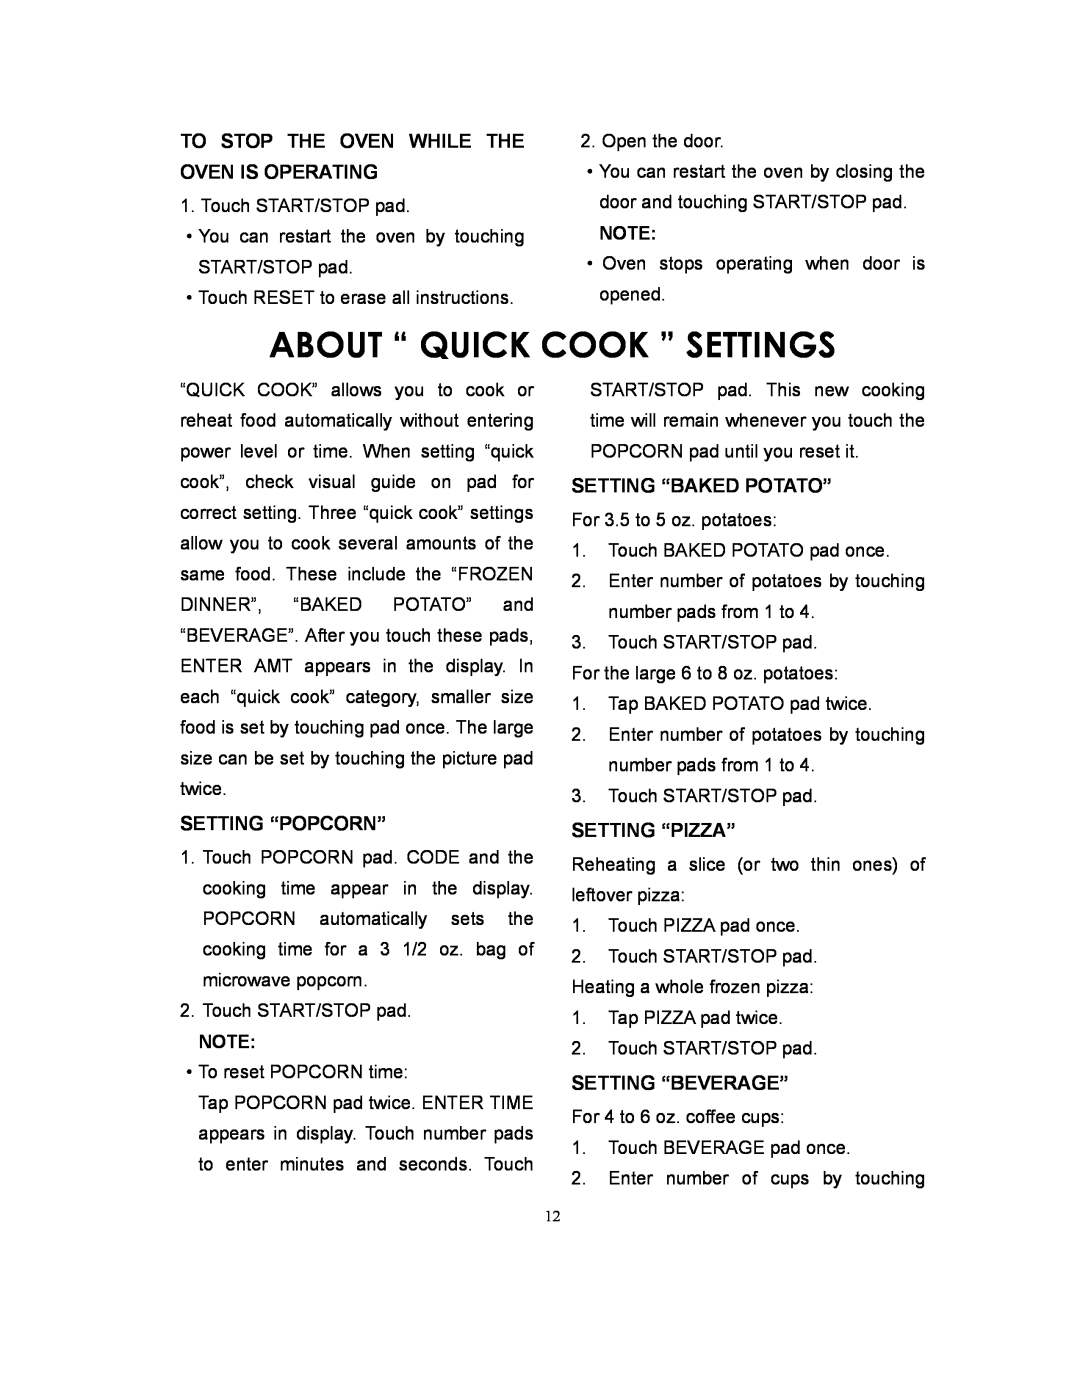 Sunbeam SMW729 owner manual About “ Quick Cook ” Settings, To Stop The Oven While The Oven Is Operating, Setting “Popcorn” 